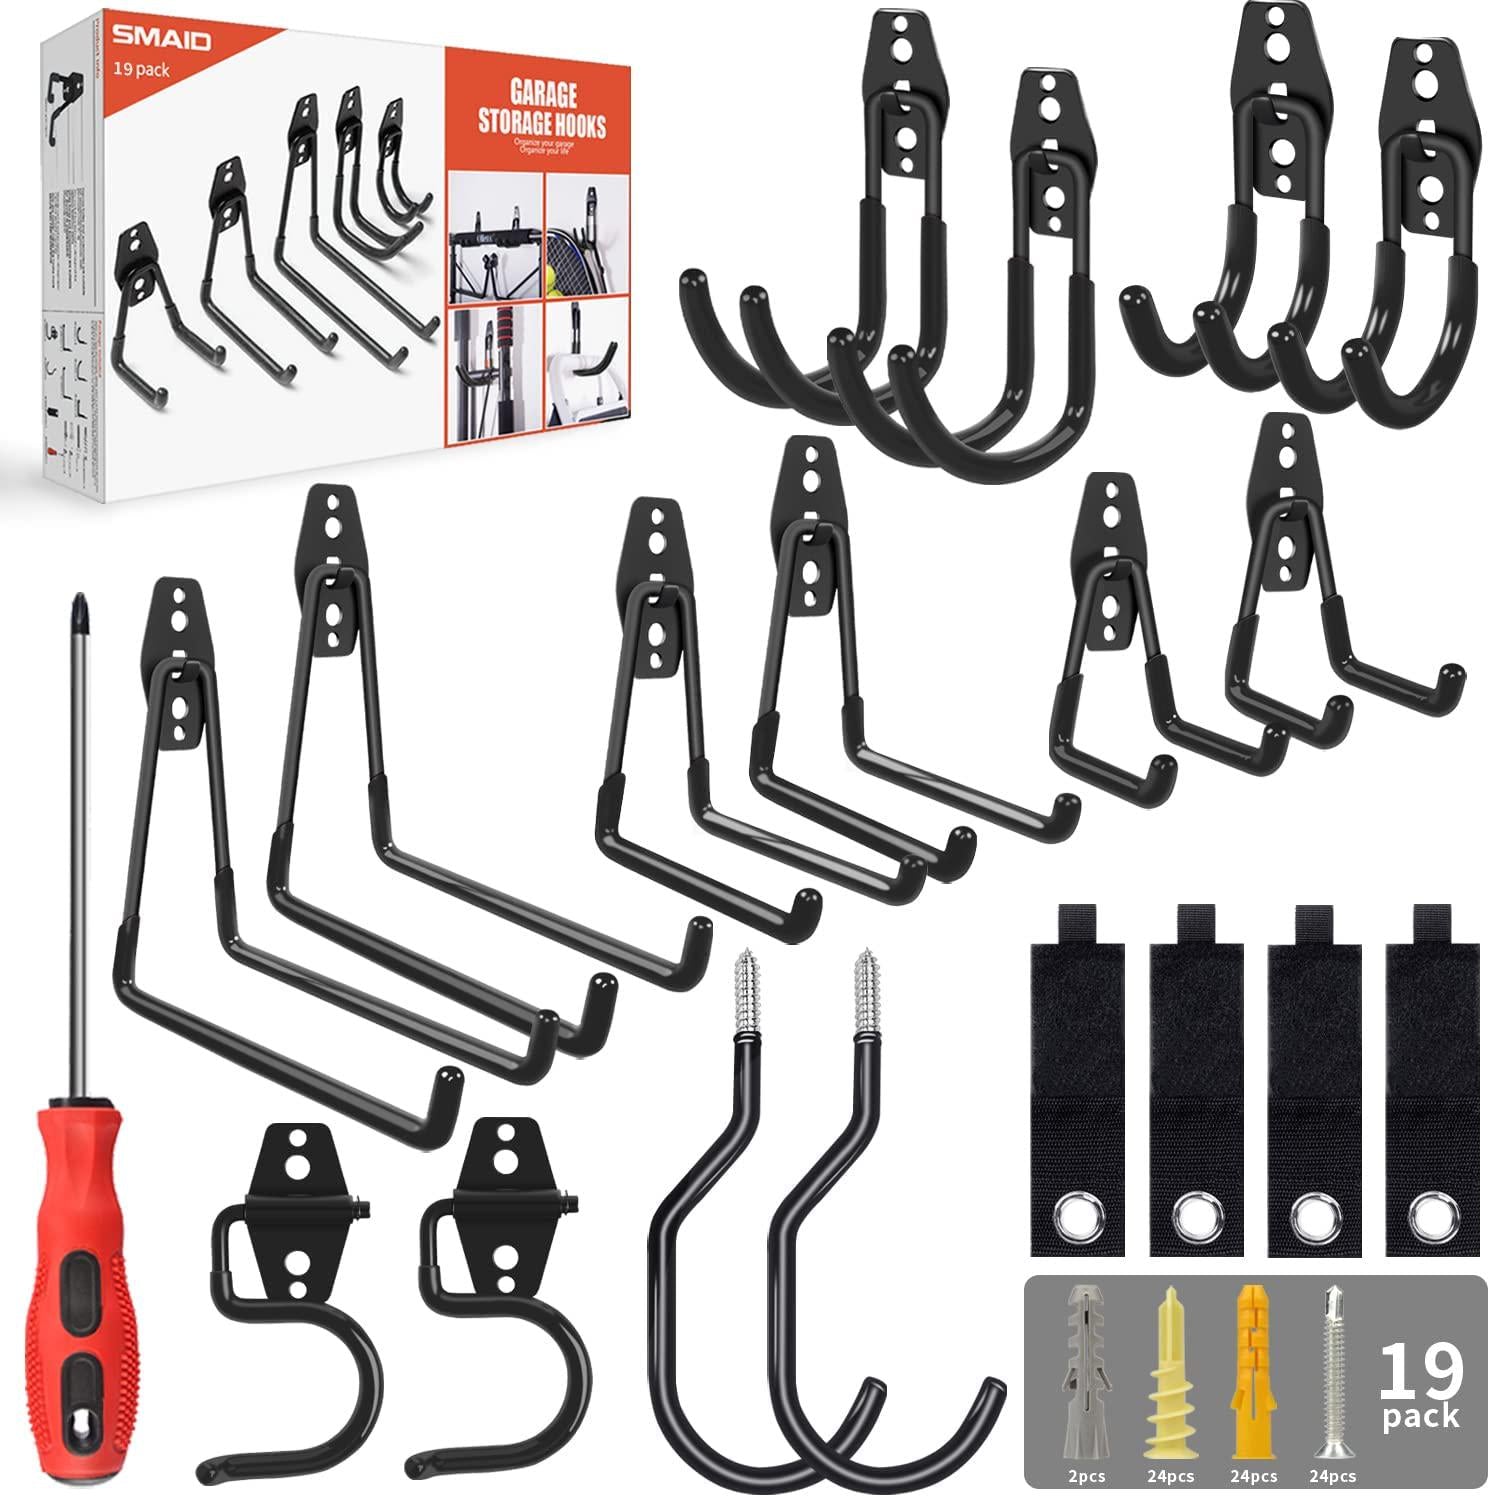 Smaid, Garage Hooks, 19 Pack Heavy Duty Garage Storage Hooks Steel Tool Hangers for Garage Wall Mount Utility Hooks and Hangers with Anti-Slip Coating for Garden Tools Organizer, Ladders, Bikes, Bulky Items